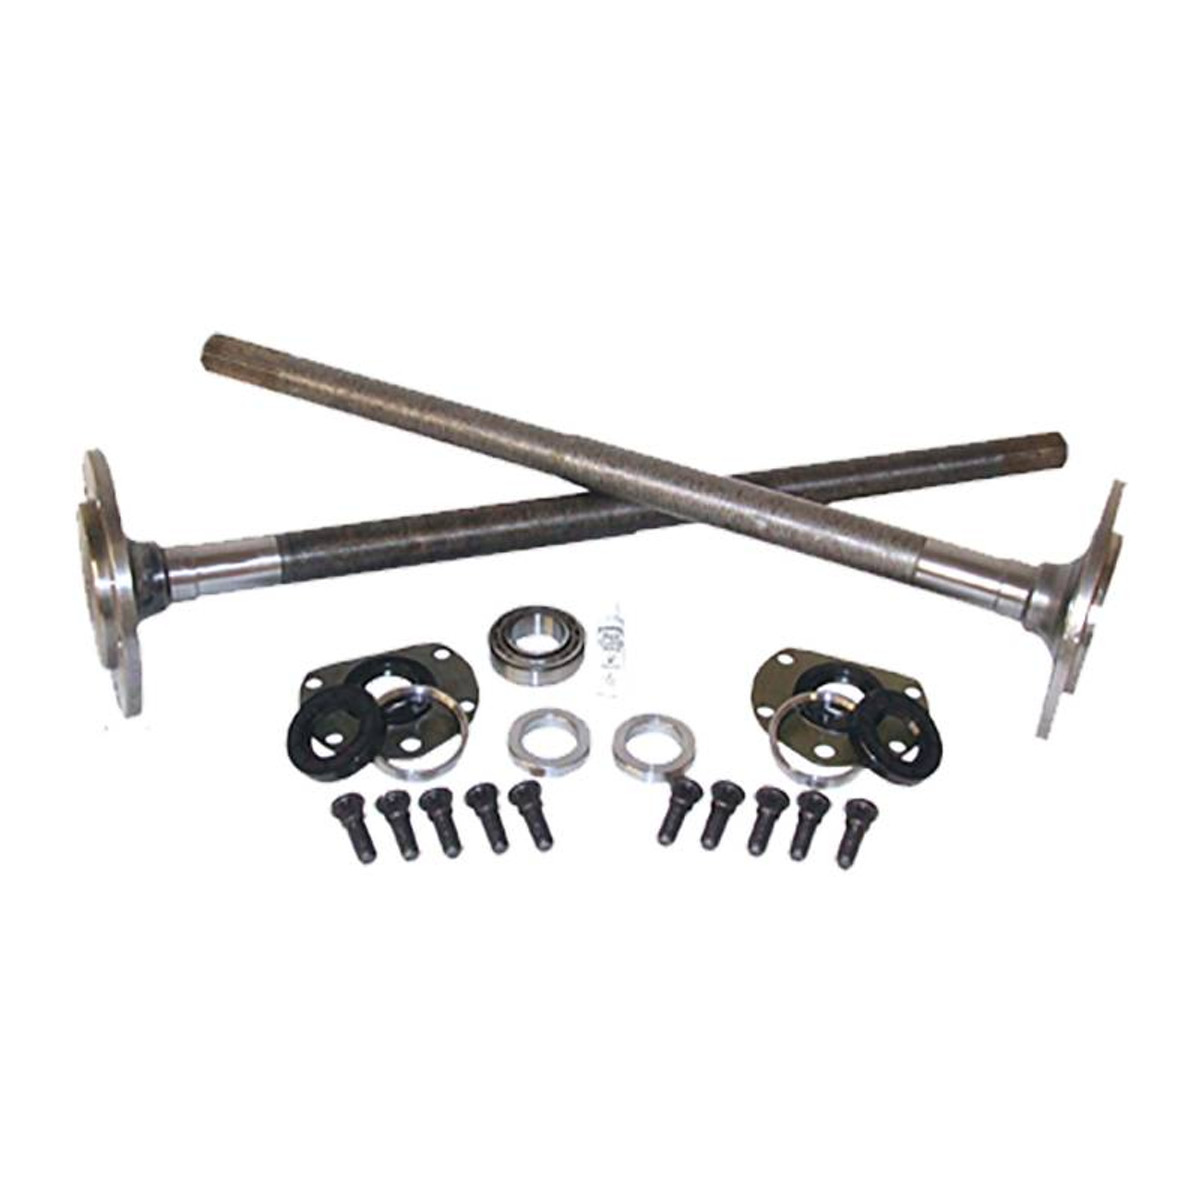 One Piece Axles For 76-79 Model 20 CJ7 Quadratrack With Bearings And 29 Splines Kit YCJQ